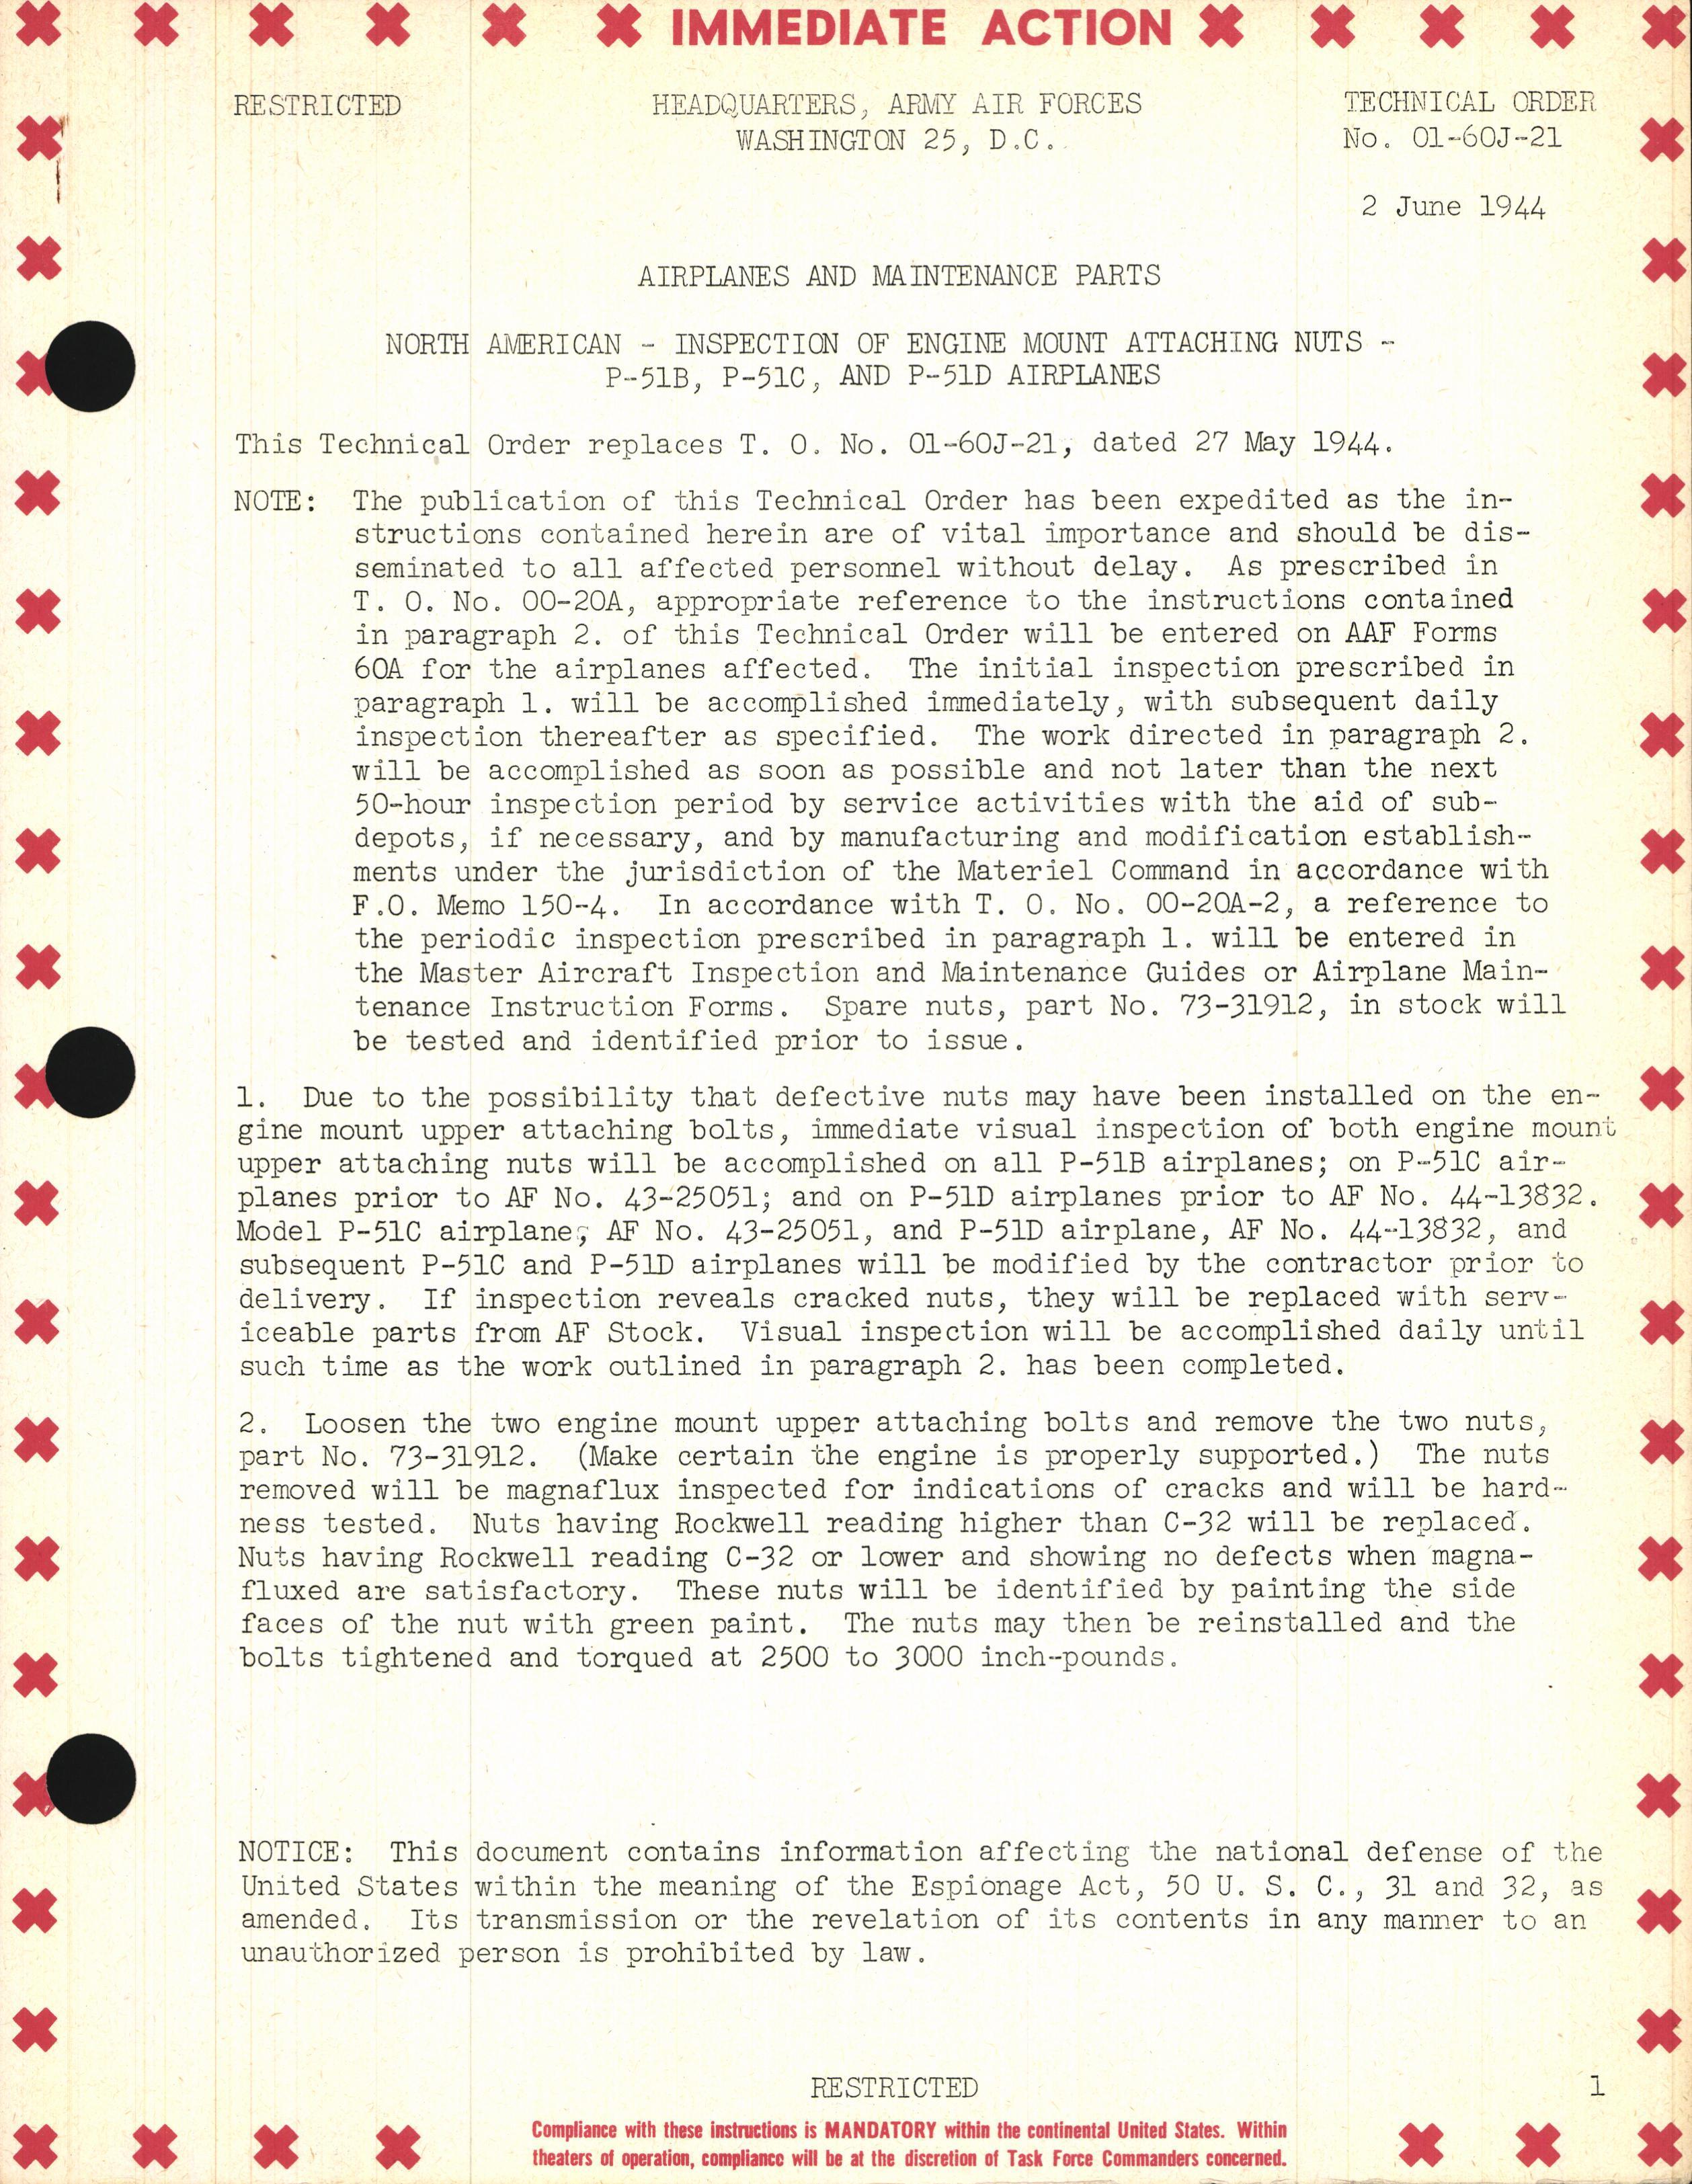 Sample page 1 from AirCorps Library document: Inspection of Engine Mount Attaching Nuts for P-51B, C, and D